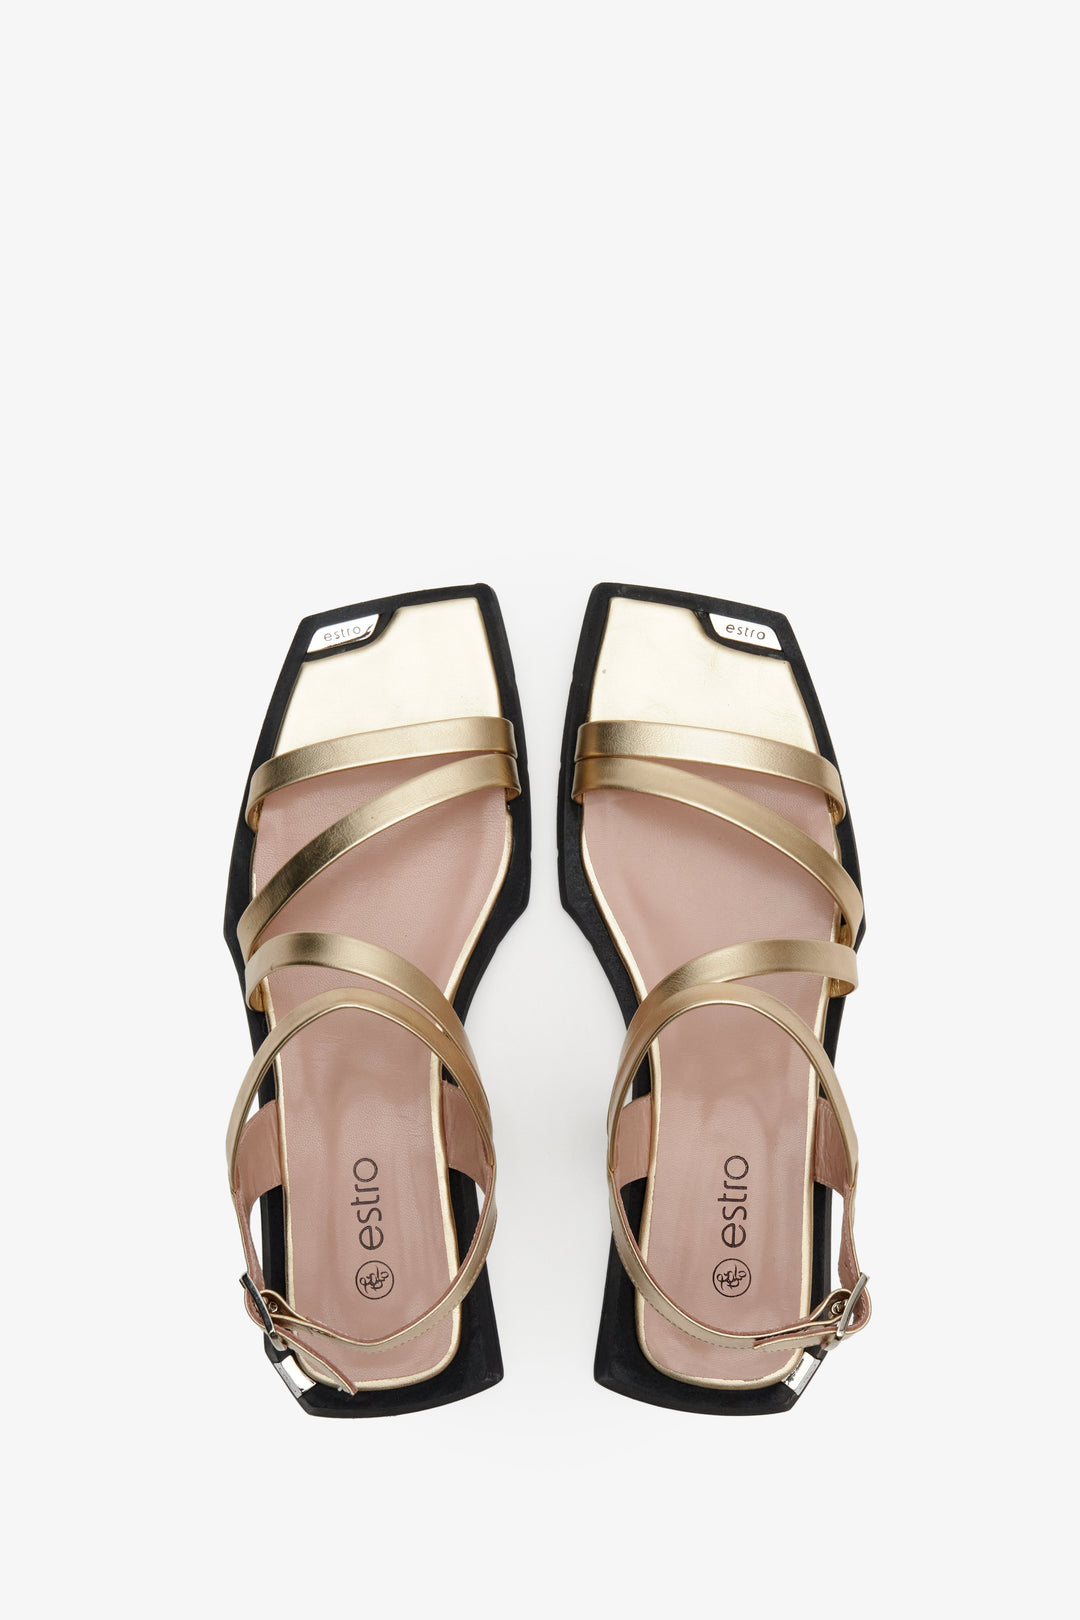 Leather, women's metallic summer sandals by Estro - presentation of the footwear from the top.